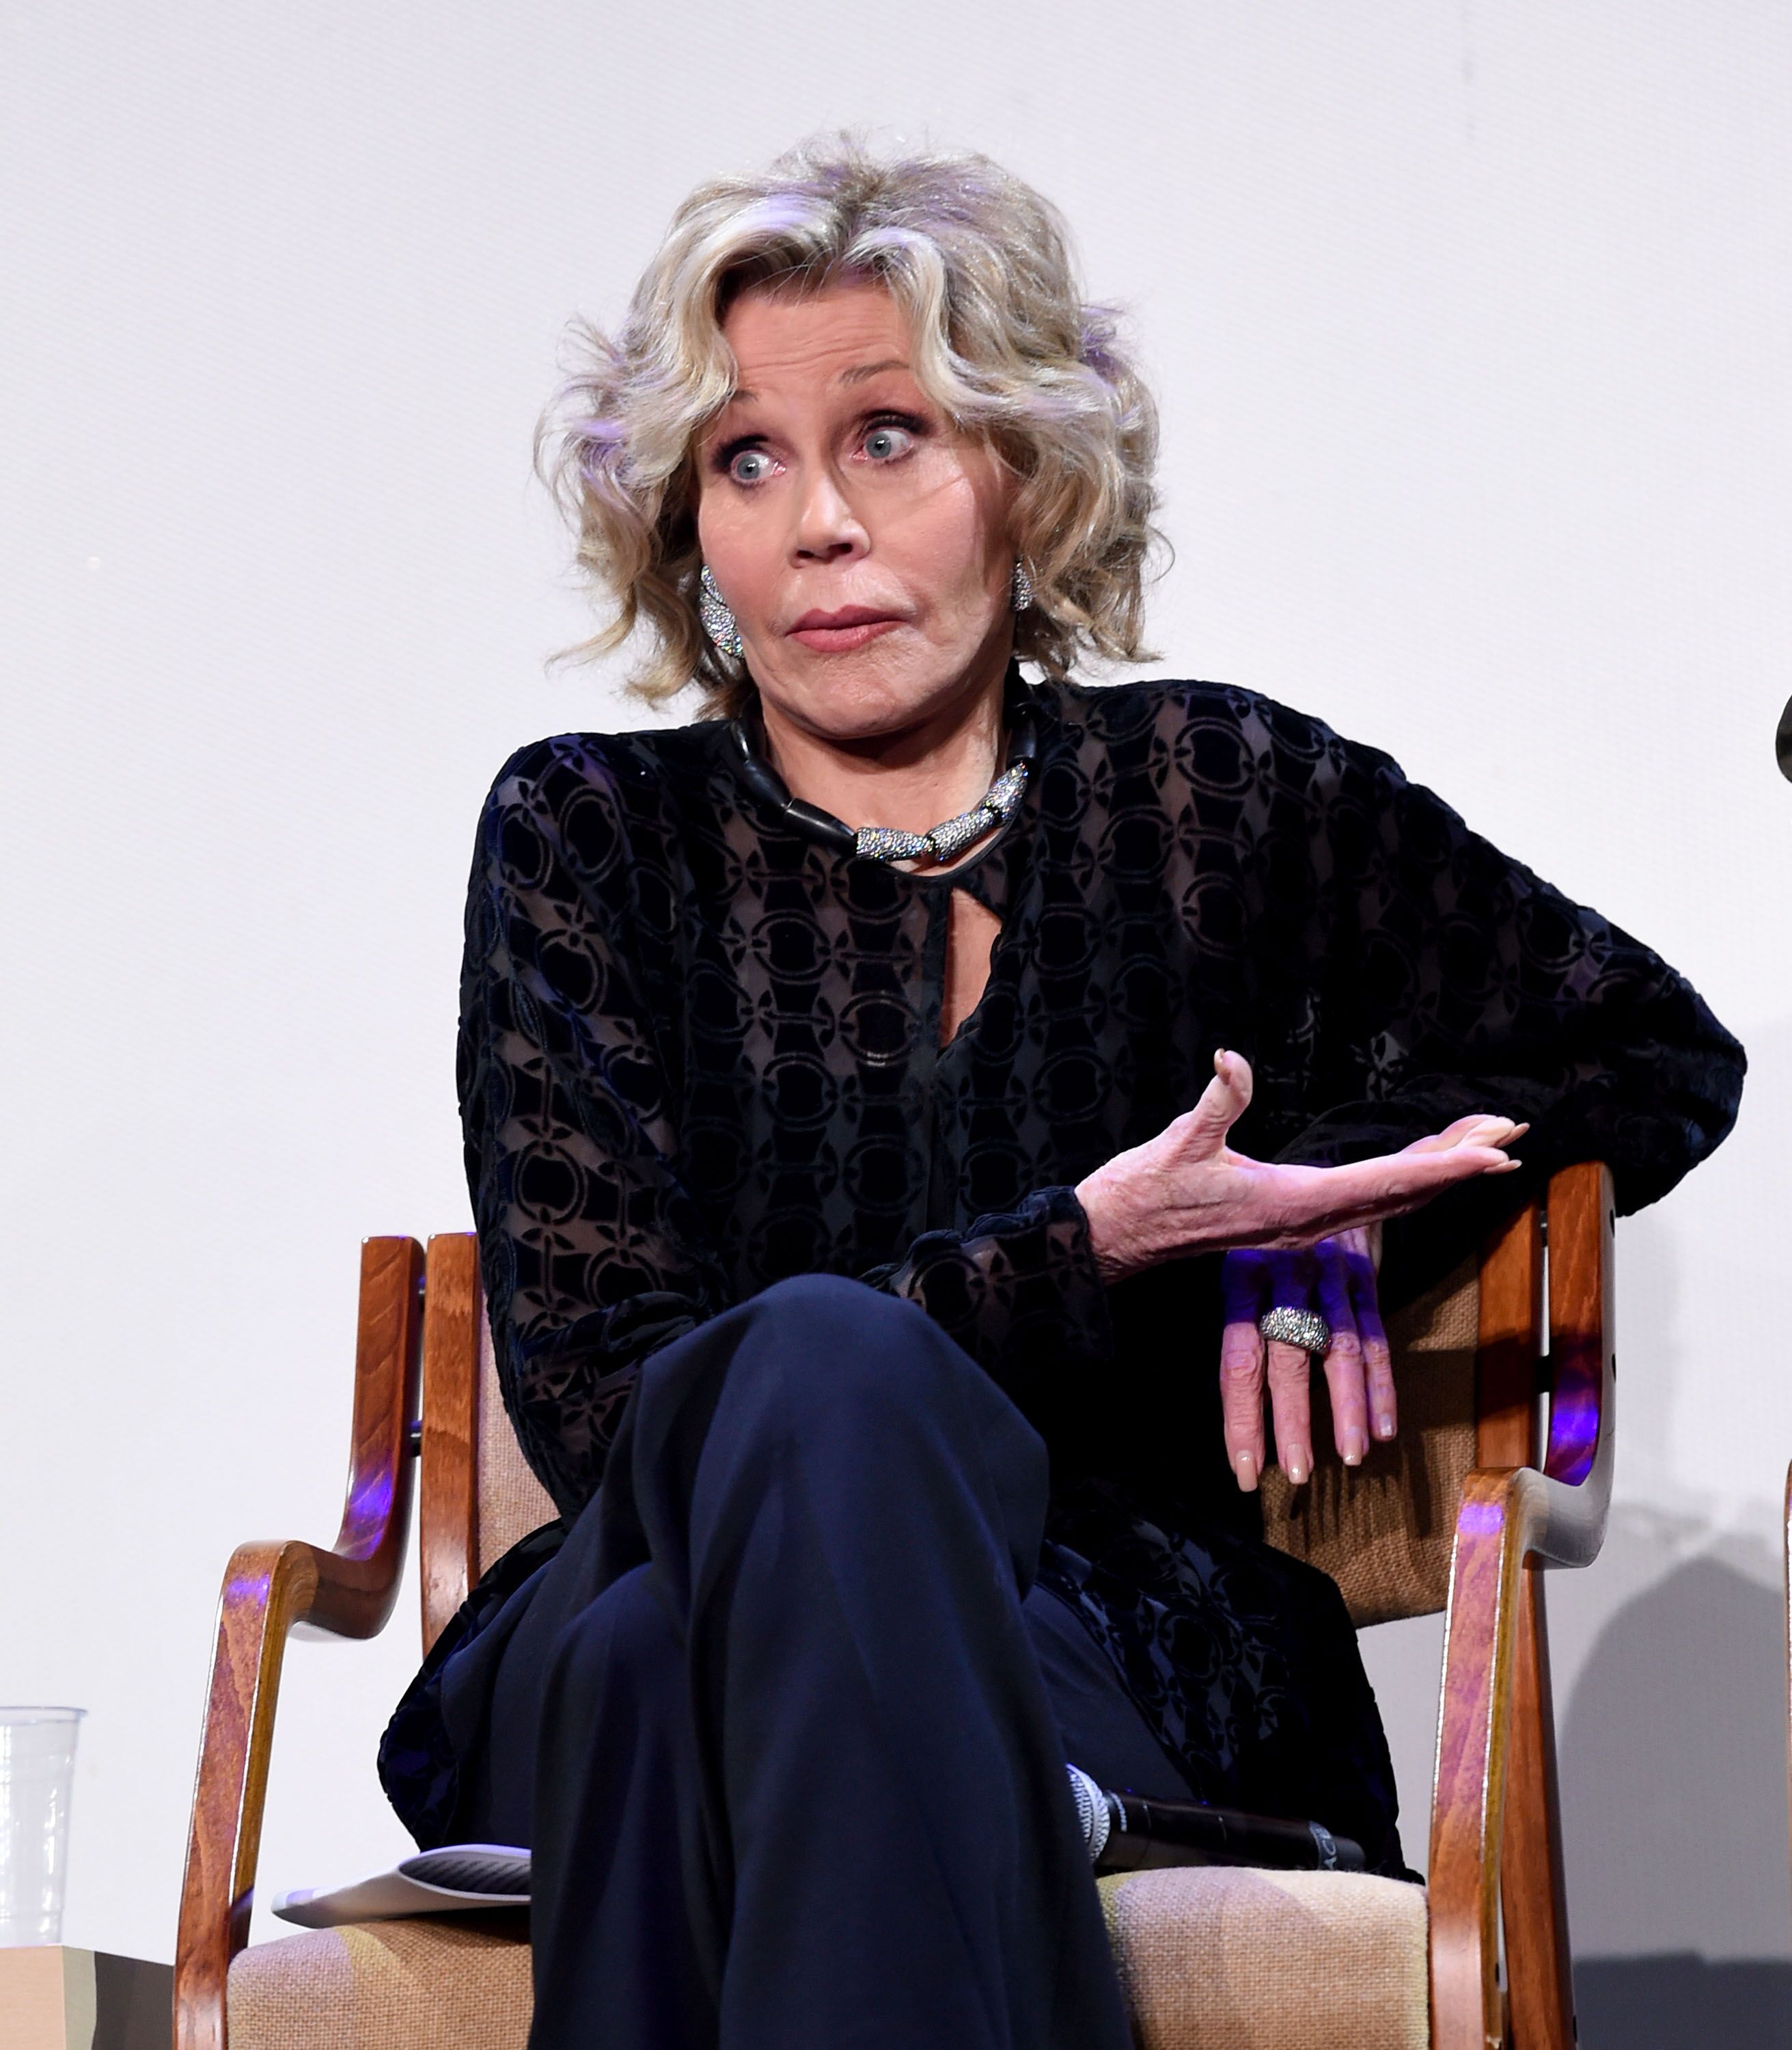 Jane Fonda appears onstage at the HFPA Film Restortion Summit: The Global Effort to Preserve Our Film Heritage at The Theatre at Ace Hotel on March 09, 2019 | Photo: Getty Images